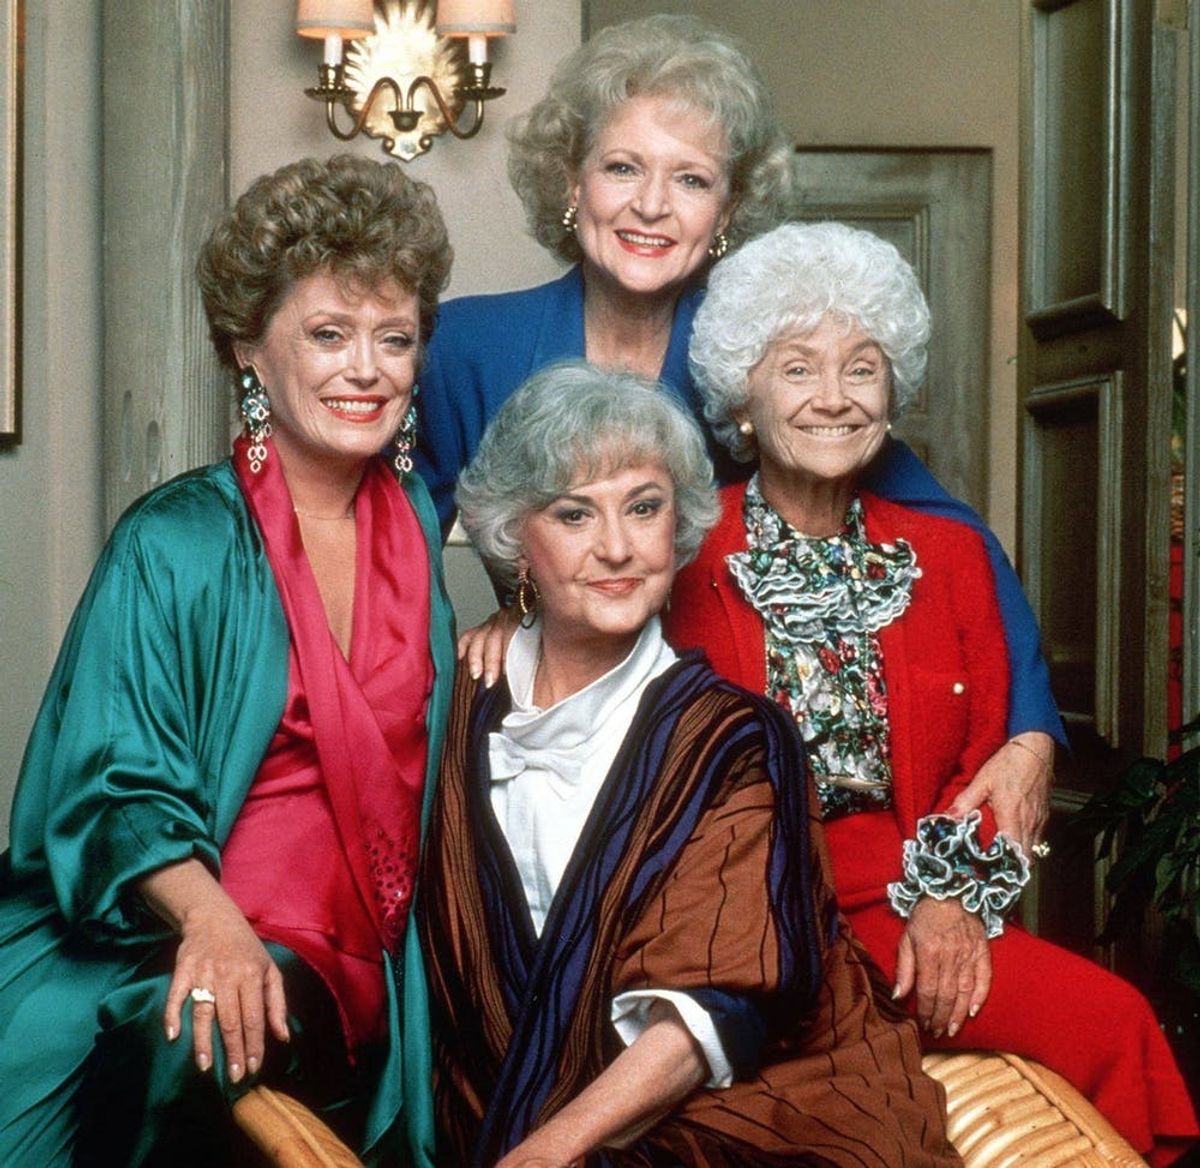 There’s a New Golden Girls Cafe and We Can’t Wait to Get in Line